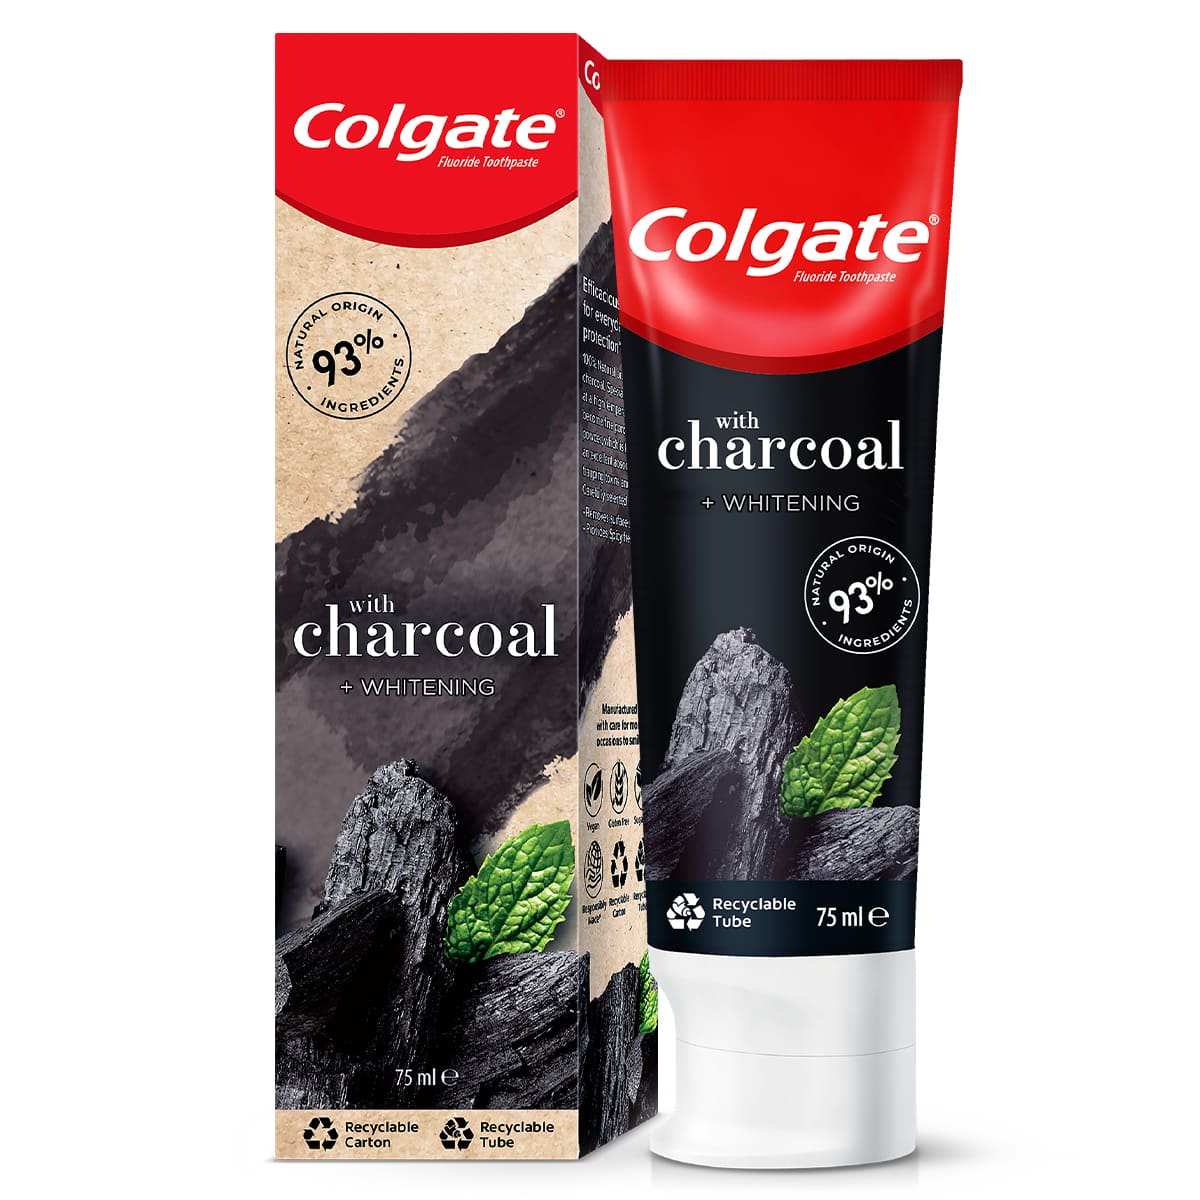 Colgate Naturals with charcoal whitening